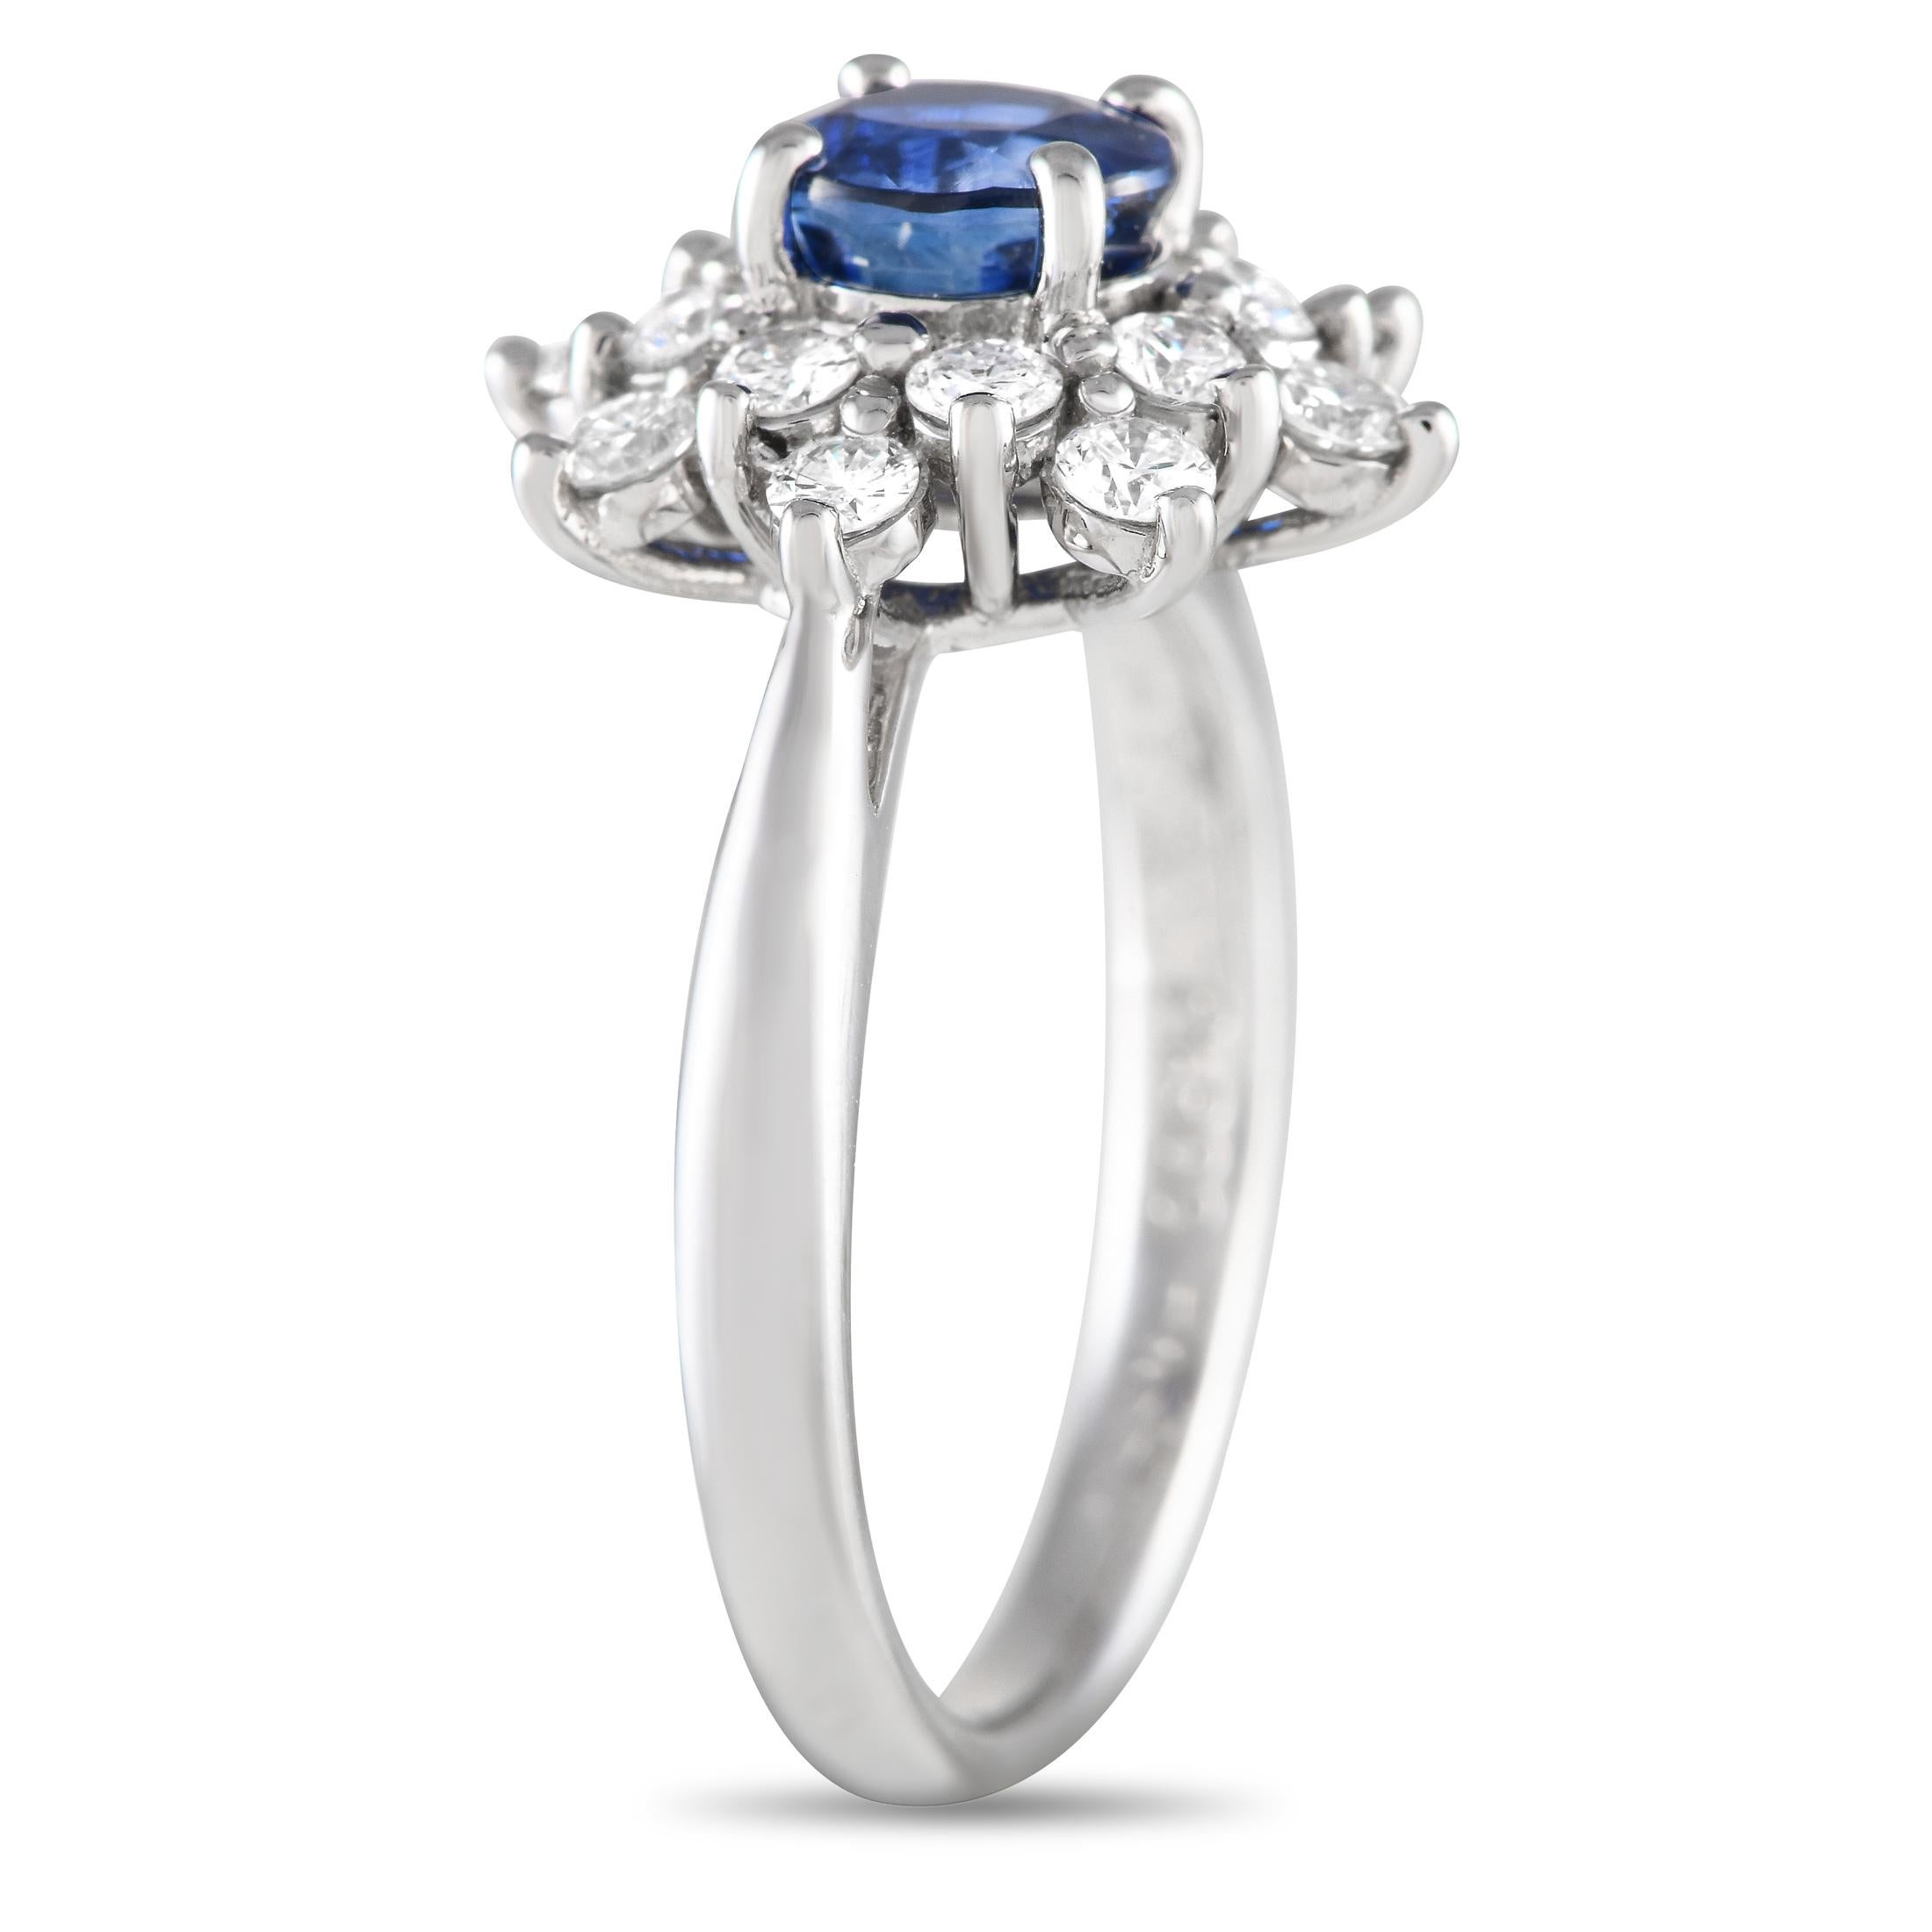 This diamond and blue sapphire ring makes a stunning symbol of love. It is crafted in everlasting platinum and topped with a gorgeous 1.20 ct round sapphire. Surrounding the dazzling blue gem is a starburst halo of round diamonds. The ring's top